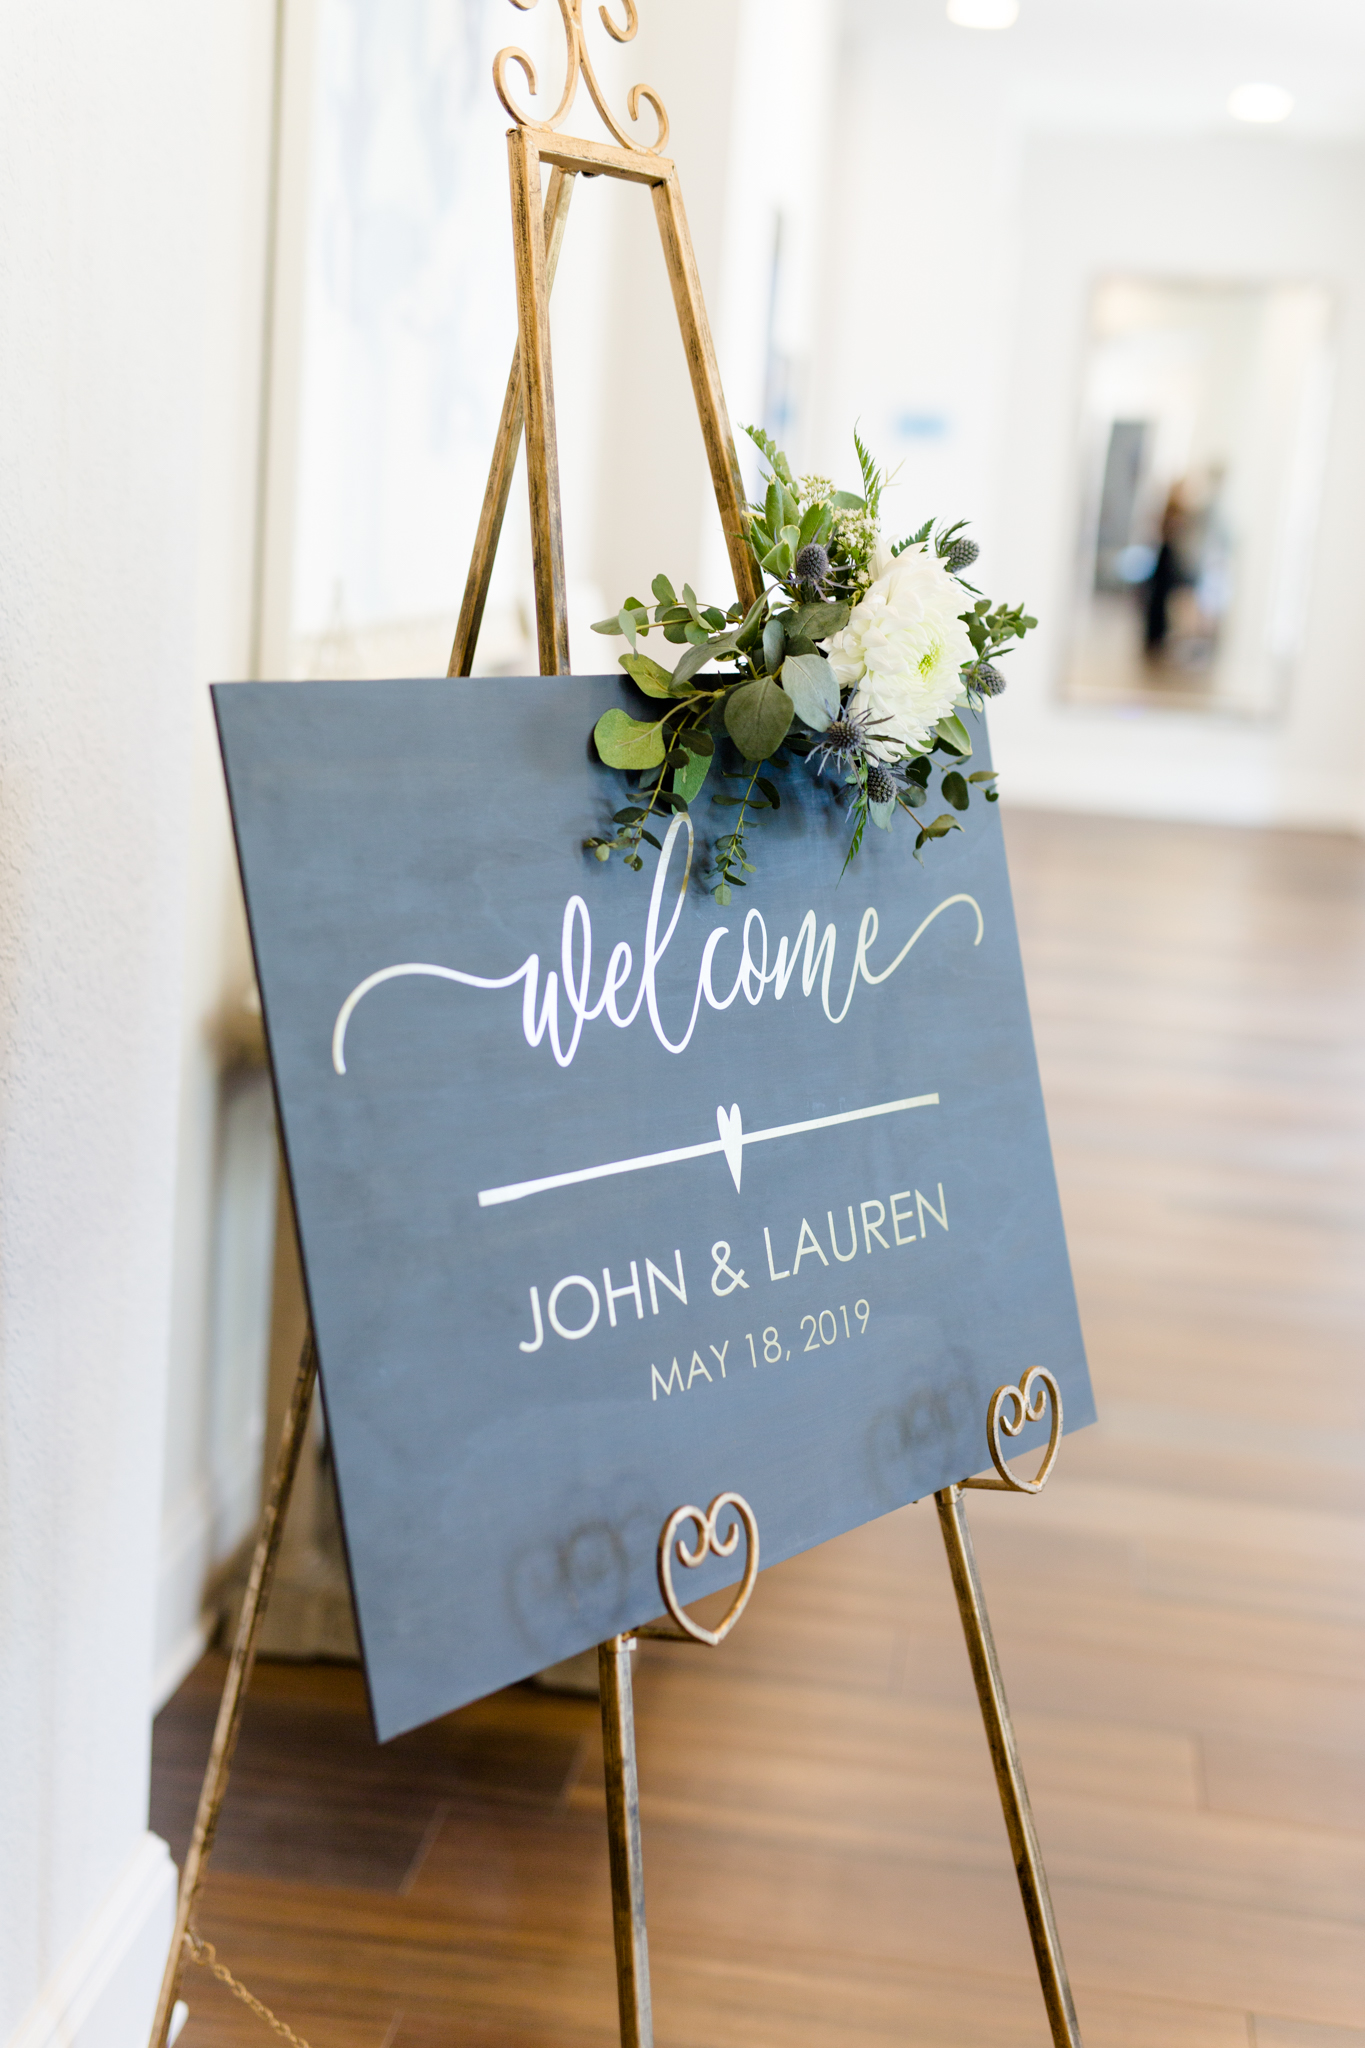 Welcome sign to Country club wedding.